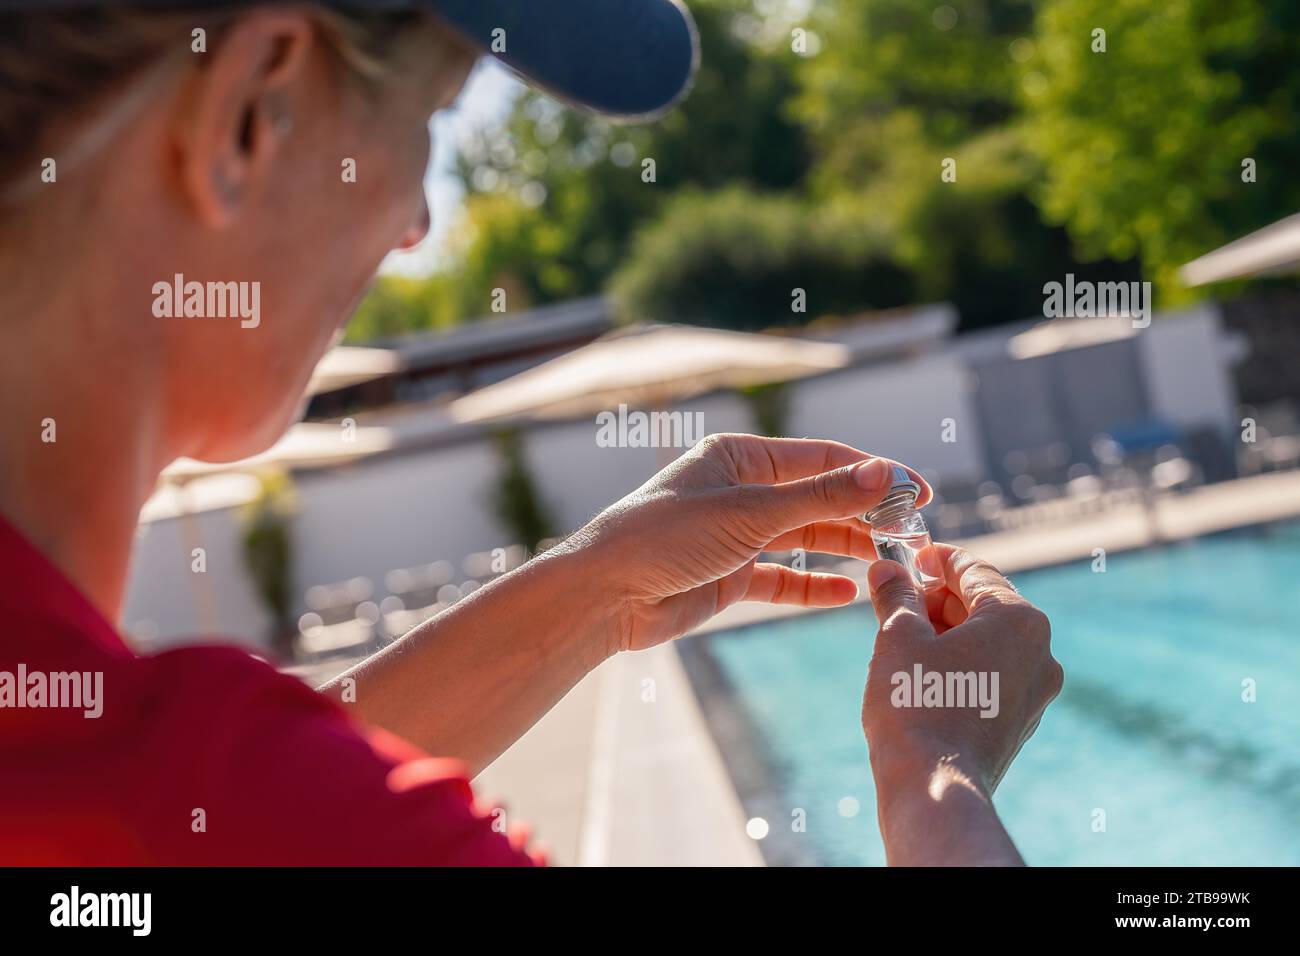 Close-up of woman's hands closing a small vial for PH value test with swimming pool in background Stock Photo